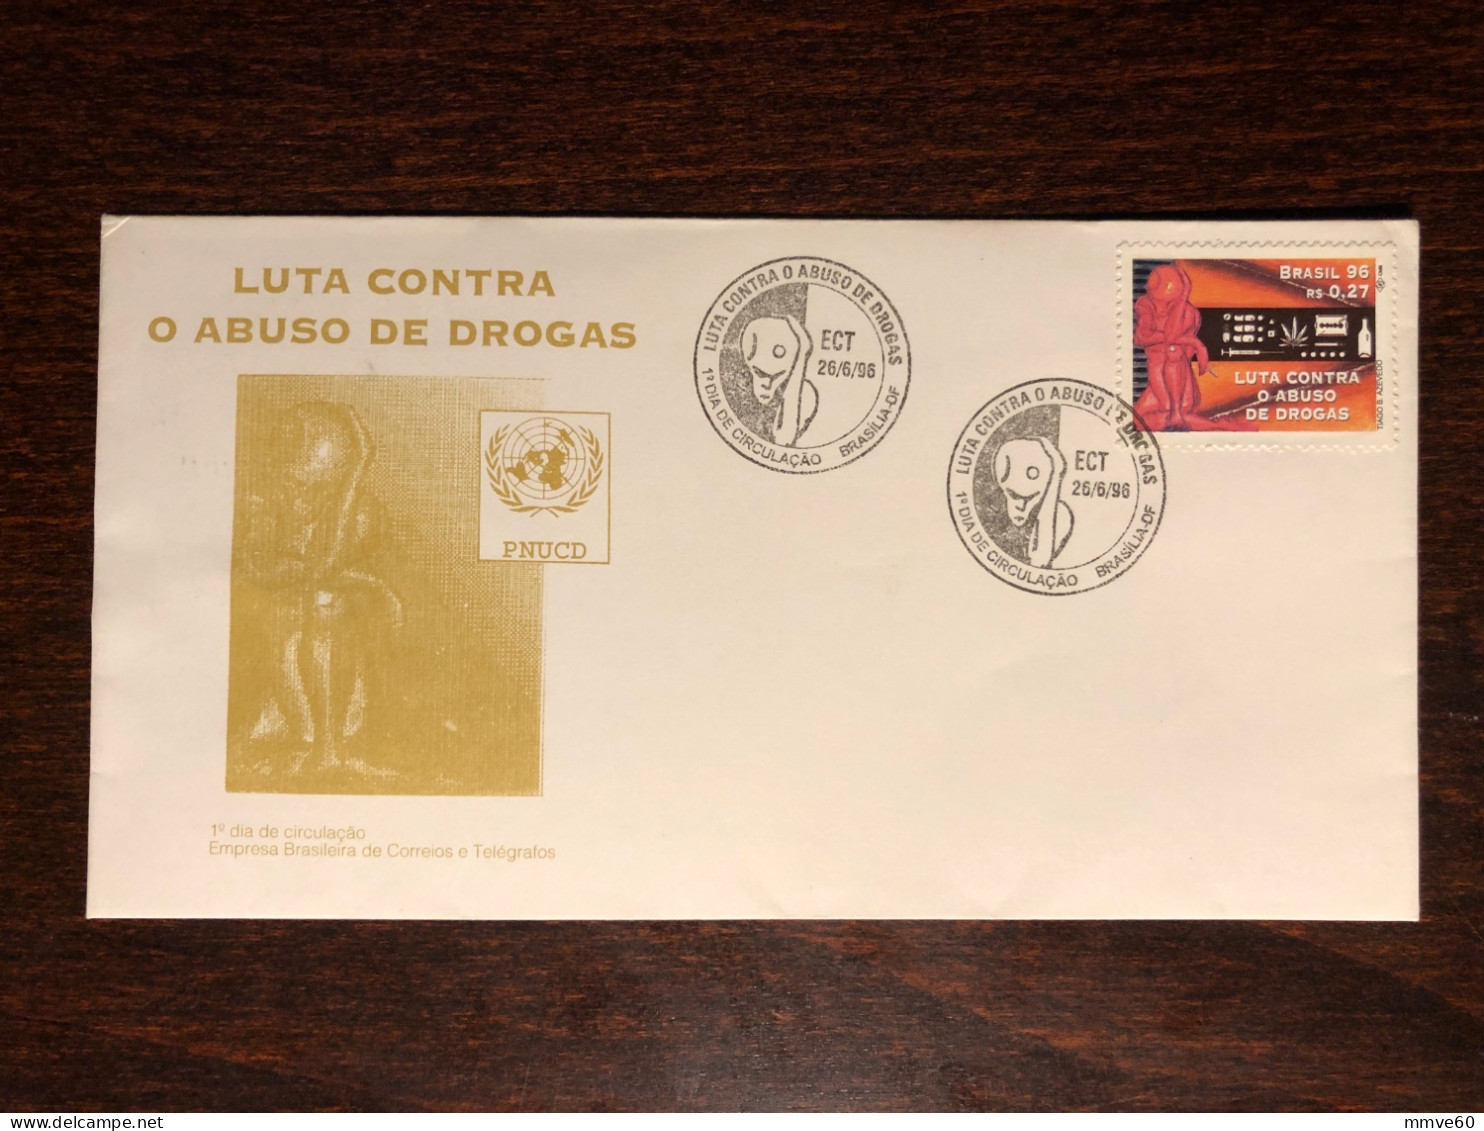 BRAZIL FDC COVER 1996 YEAR NARCOTICS DRUGS HEALTH MEDICINE STAMPS - Lettres & Documents